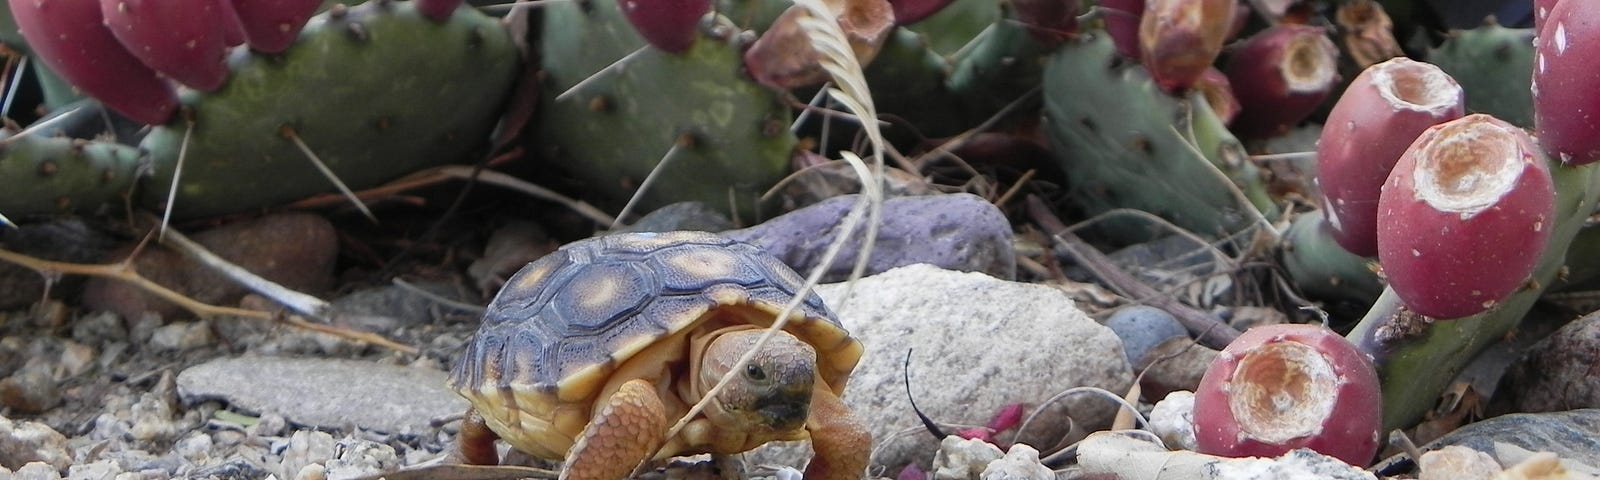 A small tortoise with a yellow and black shell walks in front of a fruiting prickly pear cactus